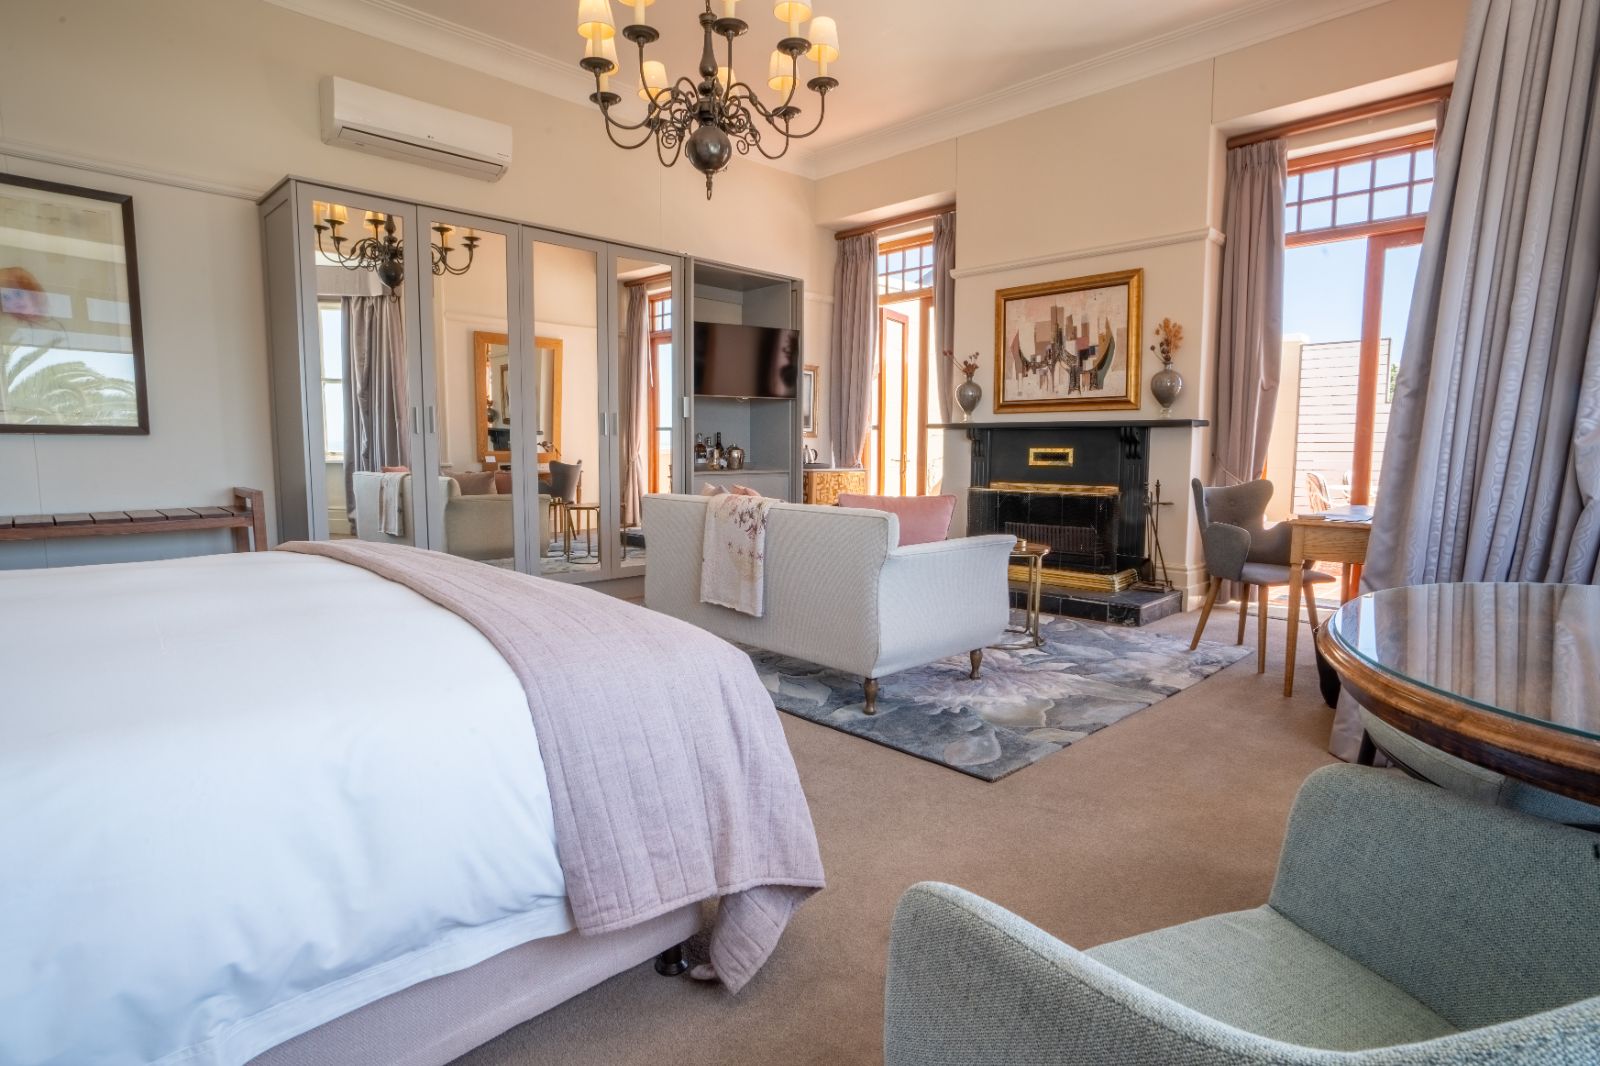 Deluxe House Room with views over the ocean at luxury hotel Ellerman House in Cape Town